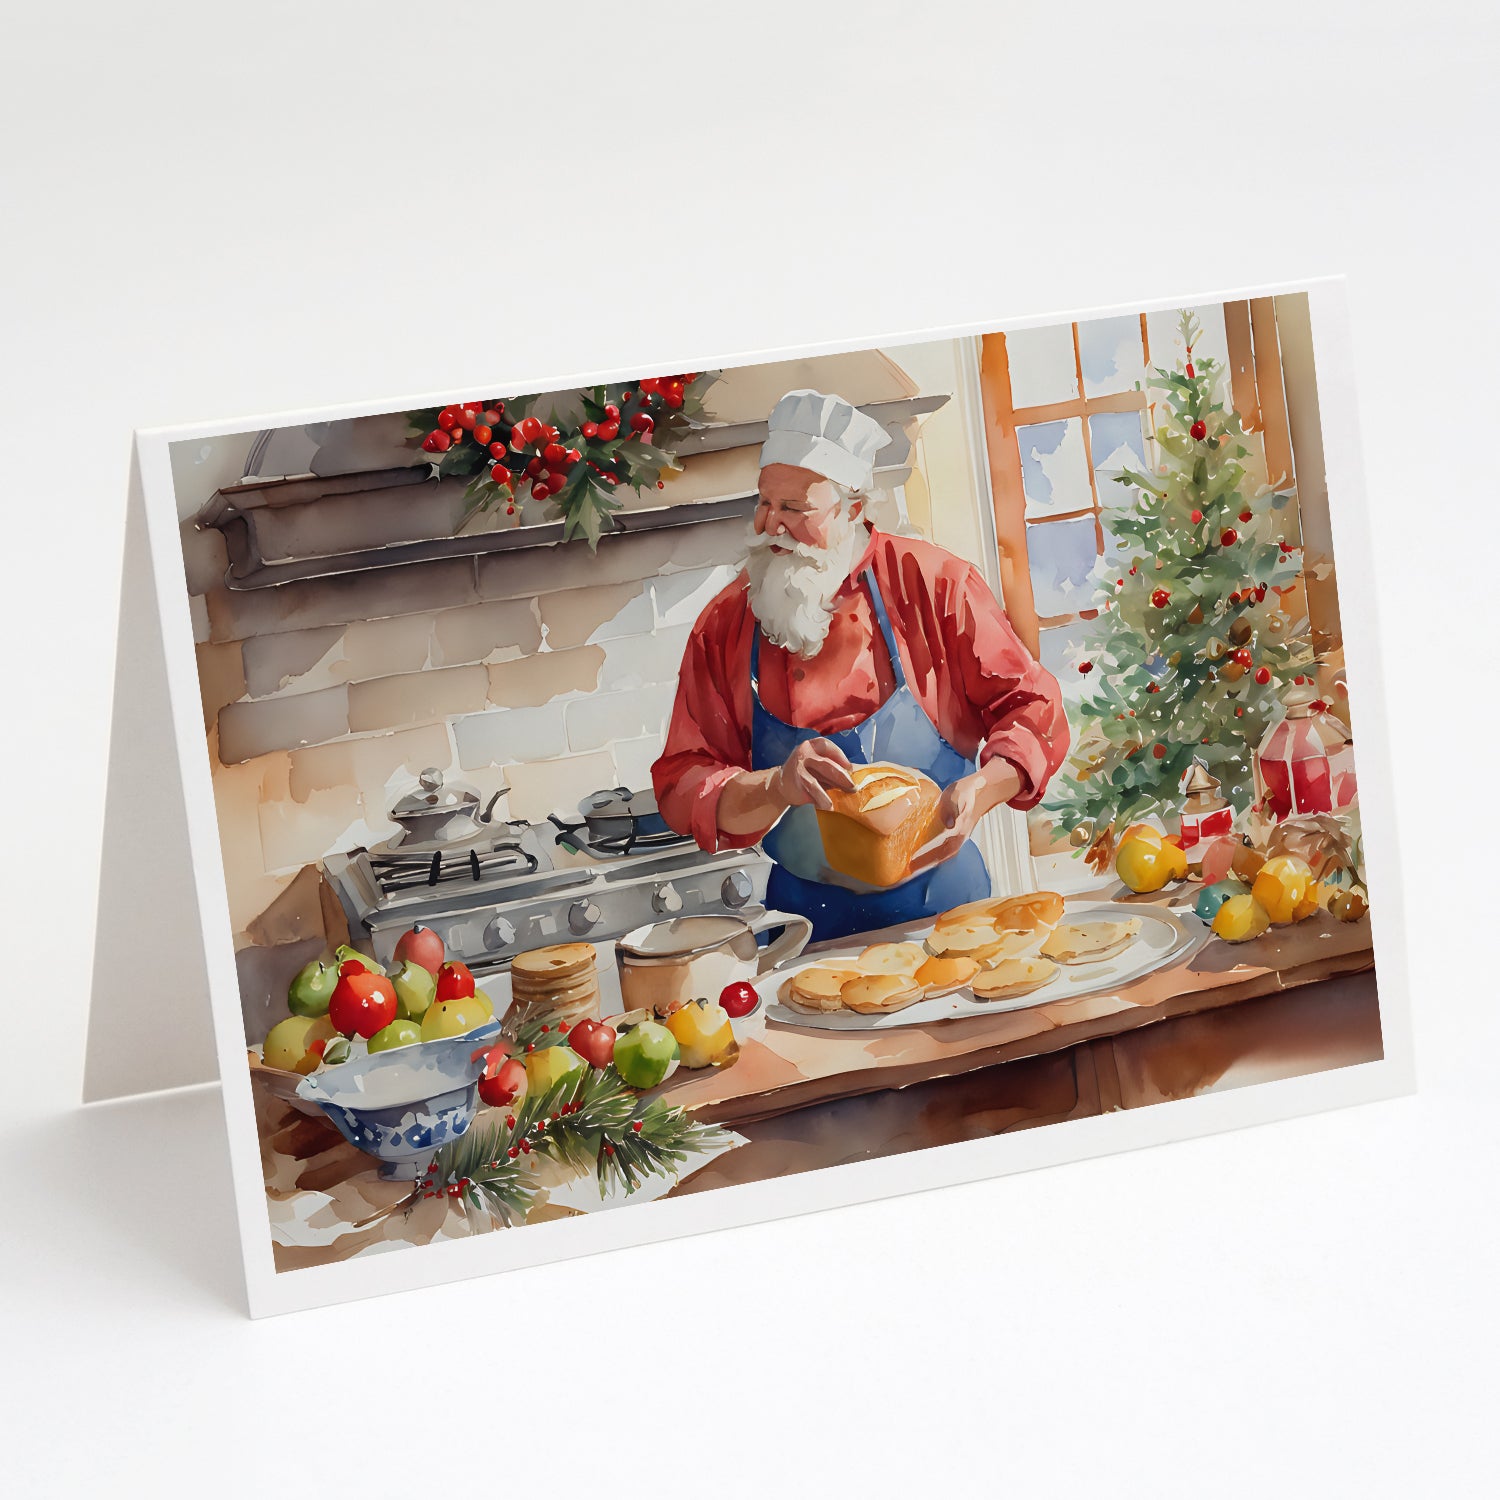 Buy this Cookies with Santa Claus Weihnachtsmann Greeting Cards Pack of 8